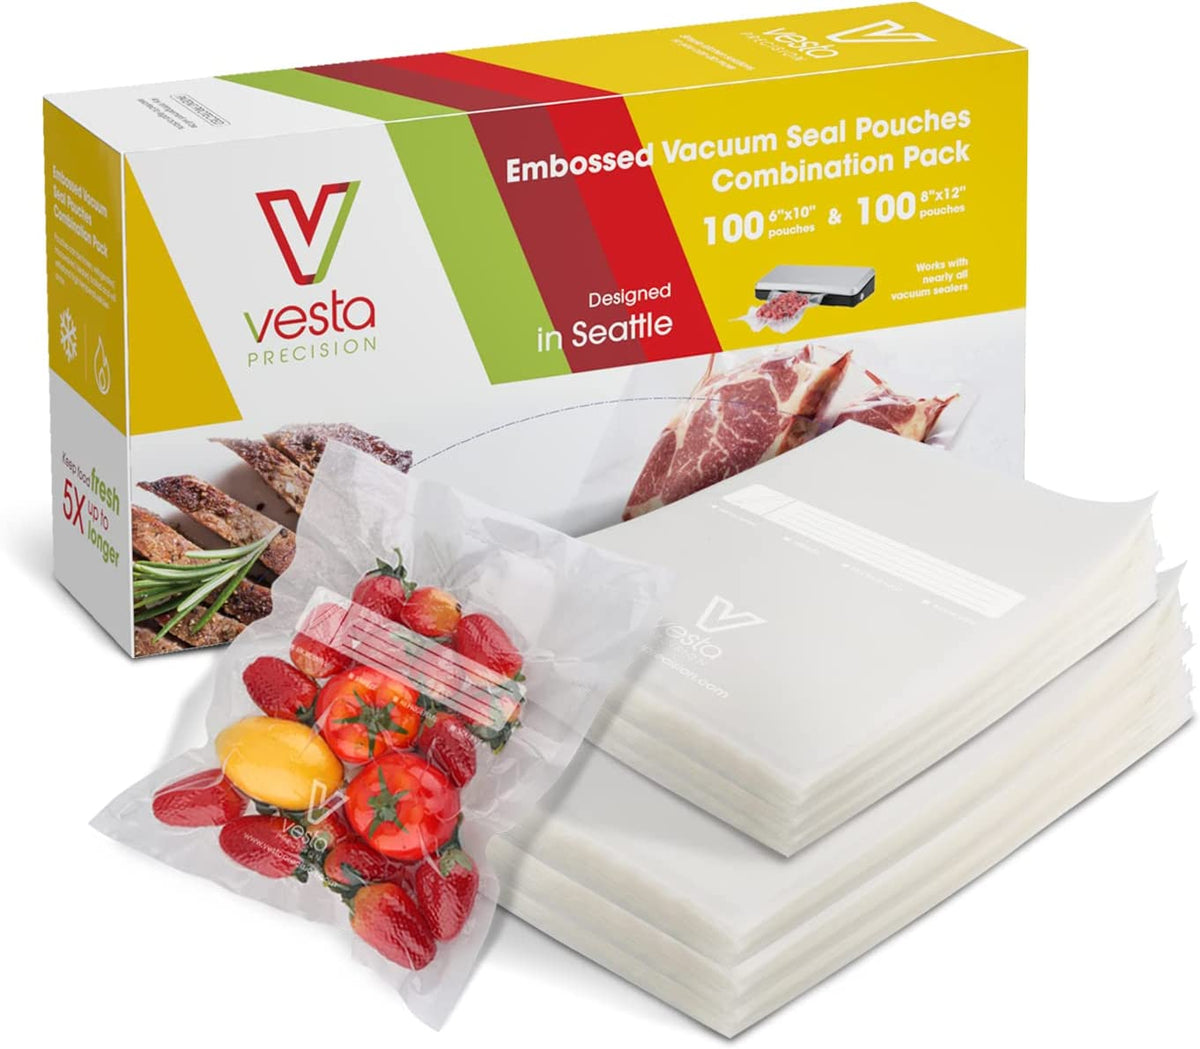 Vacuum Seal Bags - 100 count of 6x10" and 8x12" each